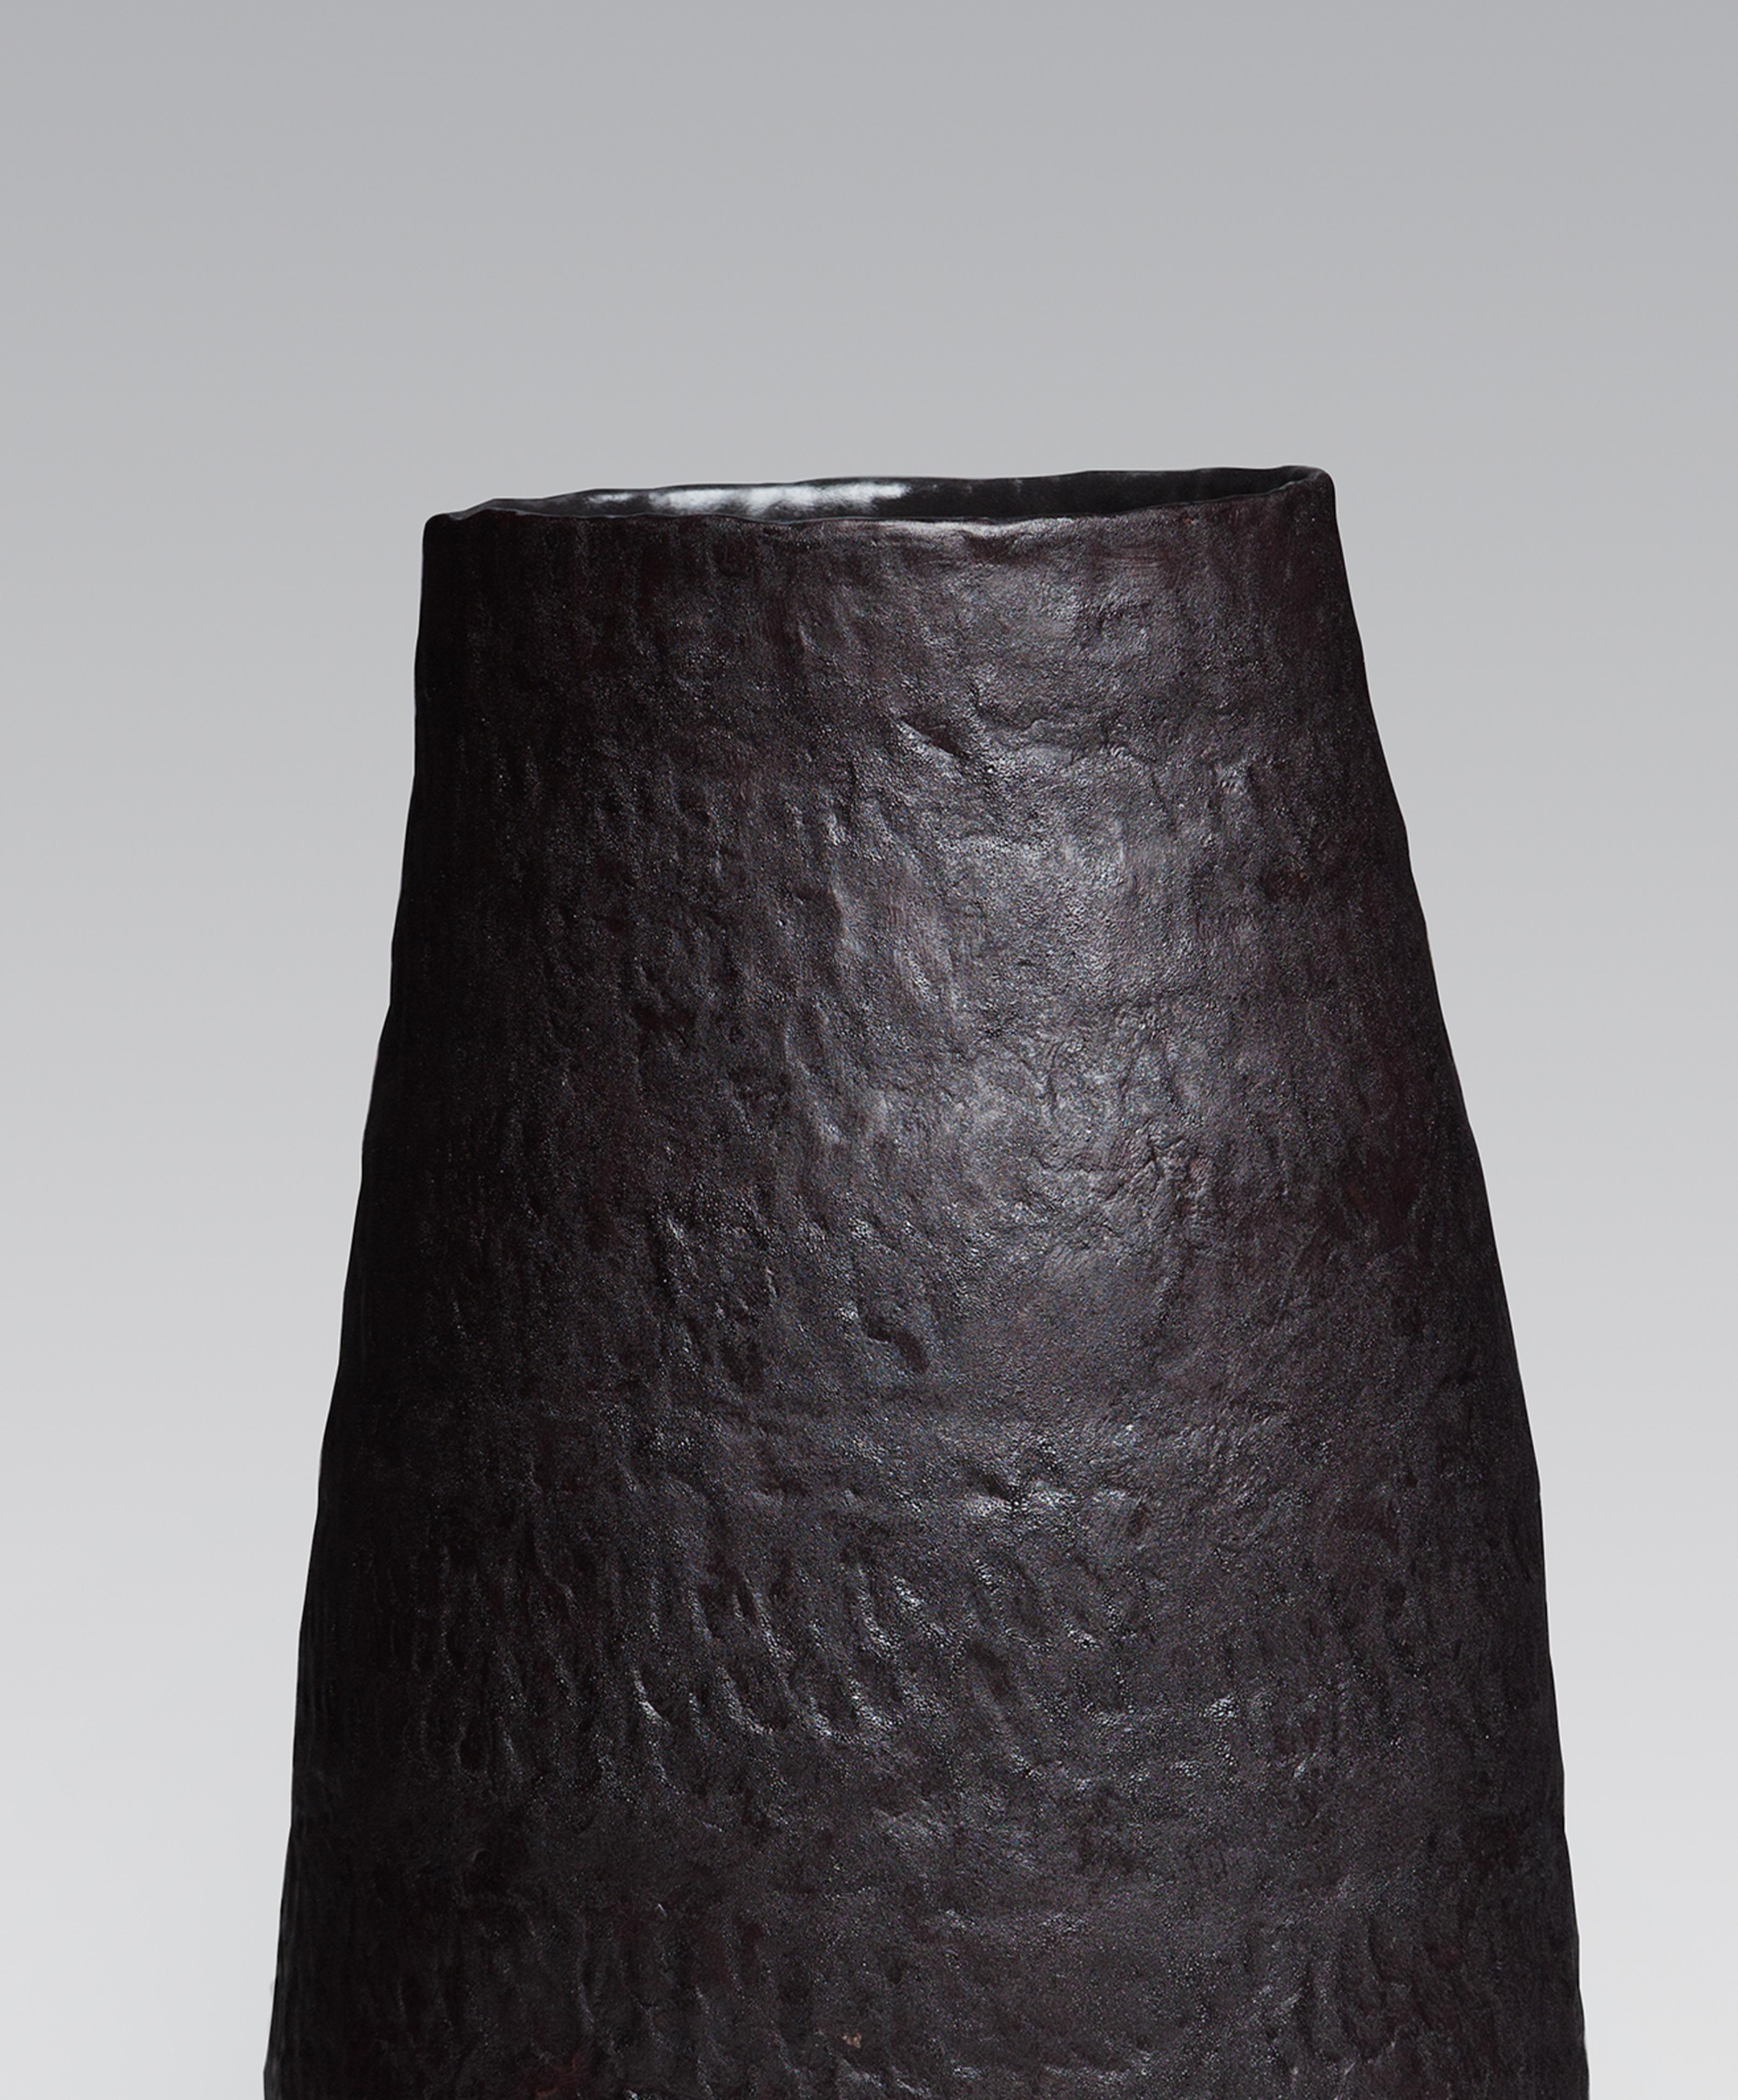 ObscuroBV02 Large vase designed and produced by Canadian artist Pascale Girardin features a partially glazed stoneware body. The entire structure is handmade. The handprints sculptured in the body are outstanding on this series of large-scale